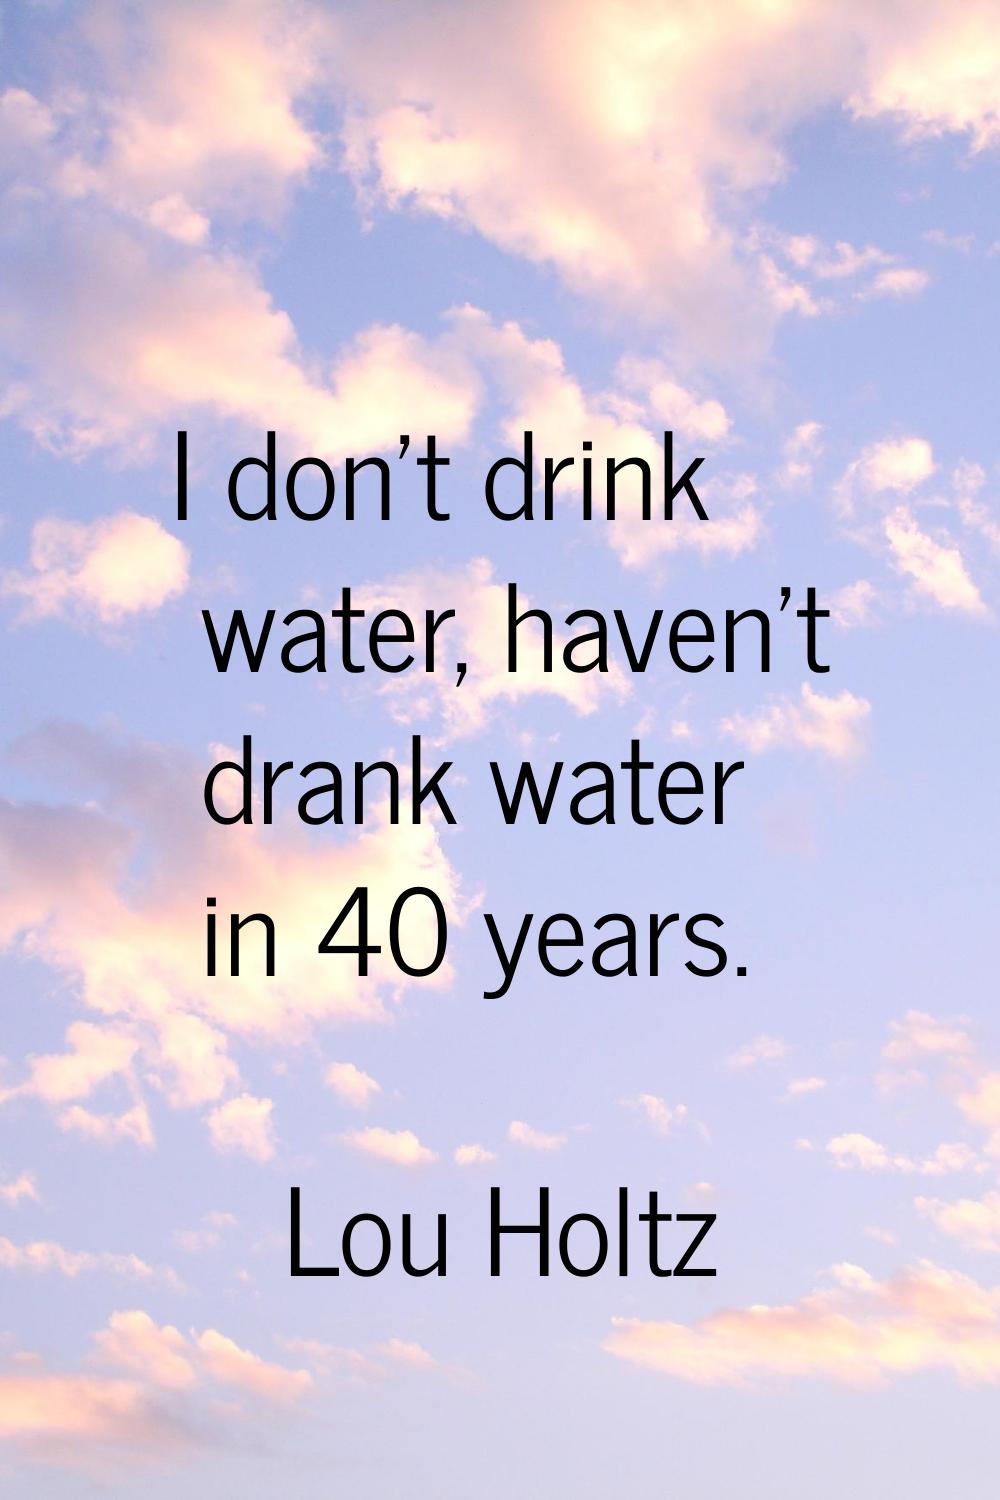 I don't drink water, haven't drank water in 40 years.